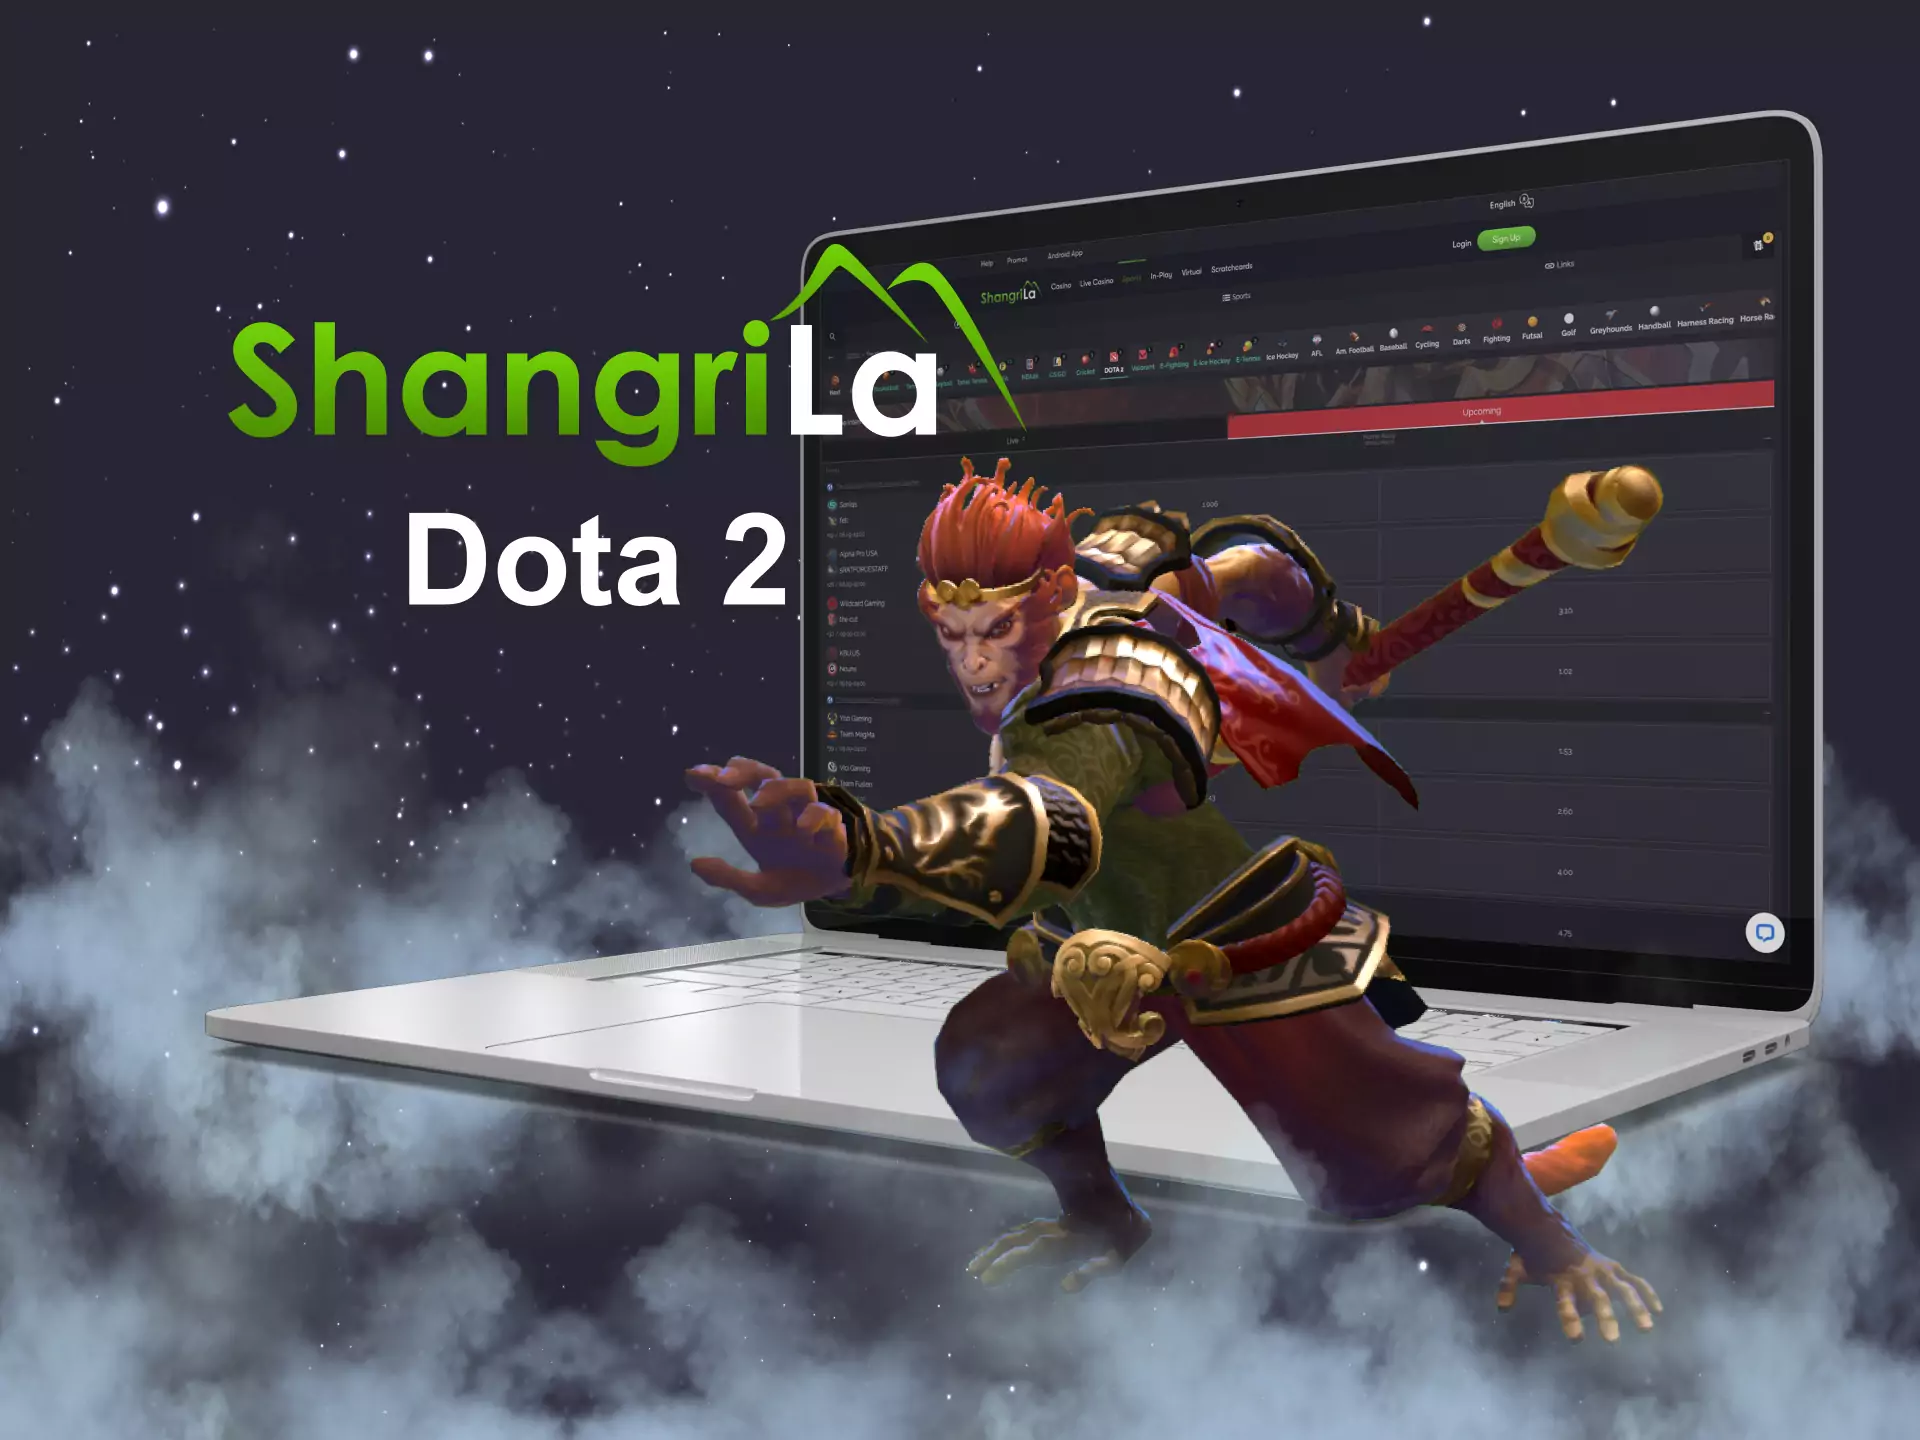 The Dota 2 events at Shangri La are always available for betting.